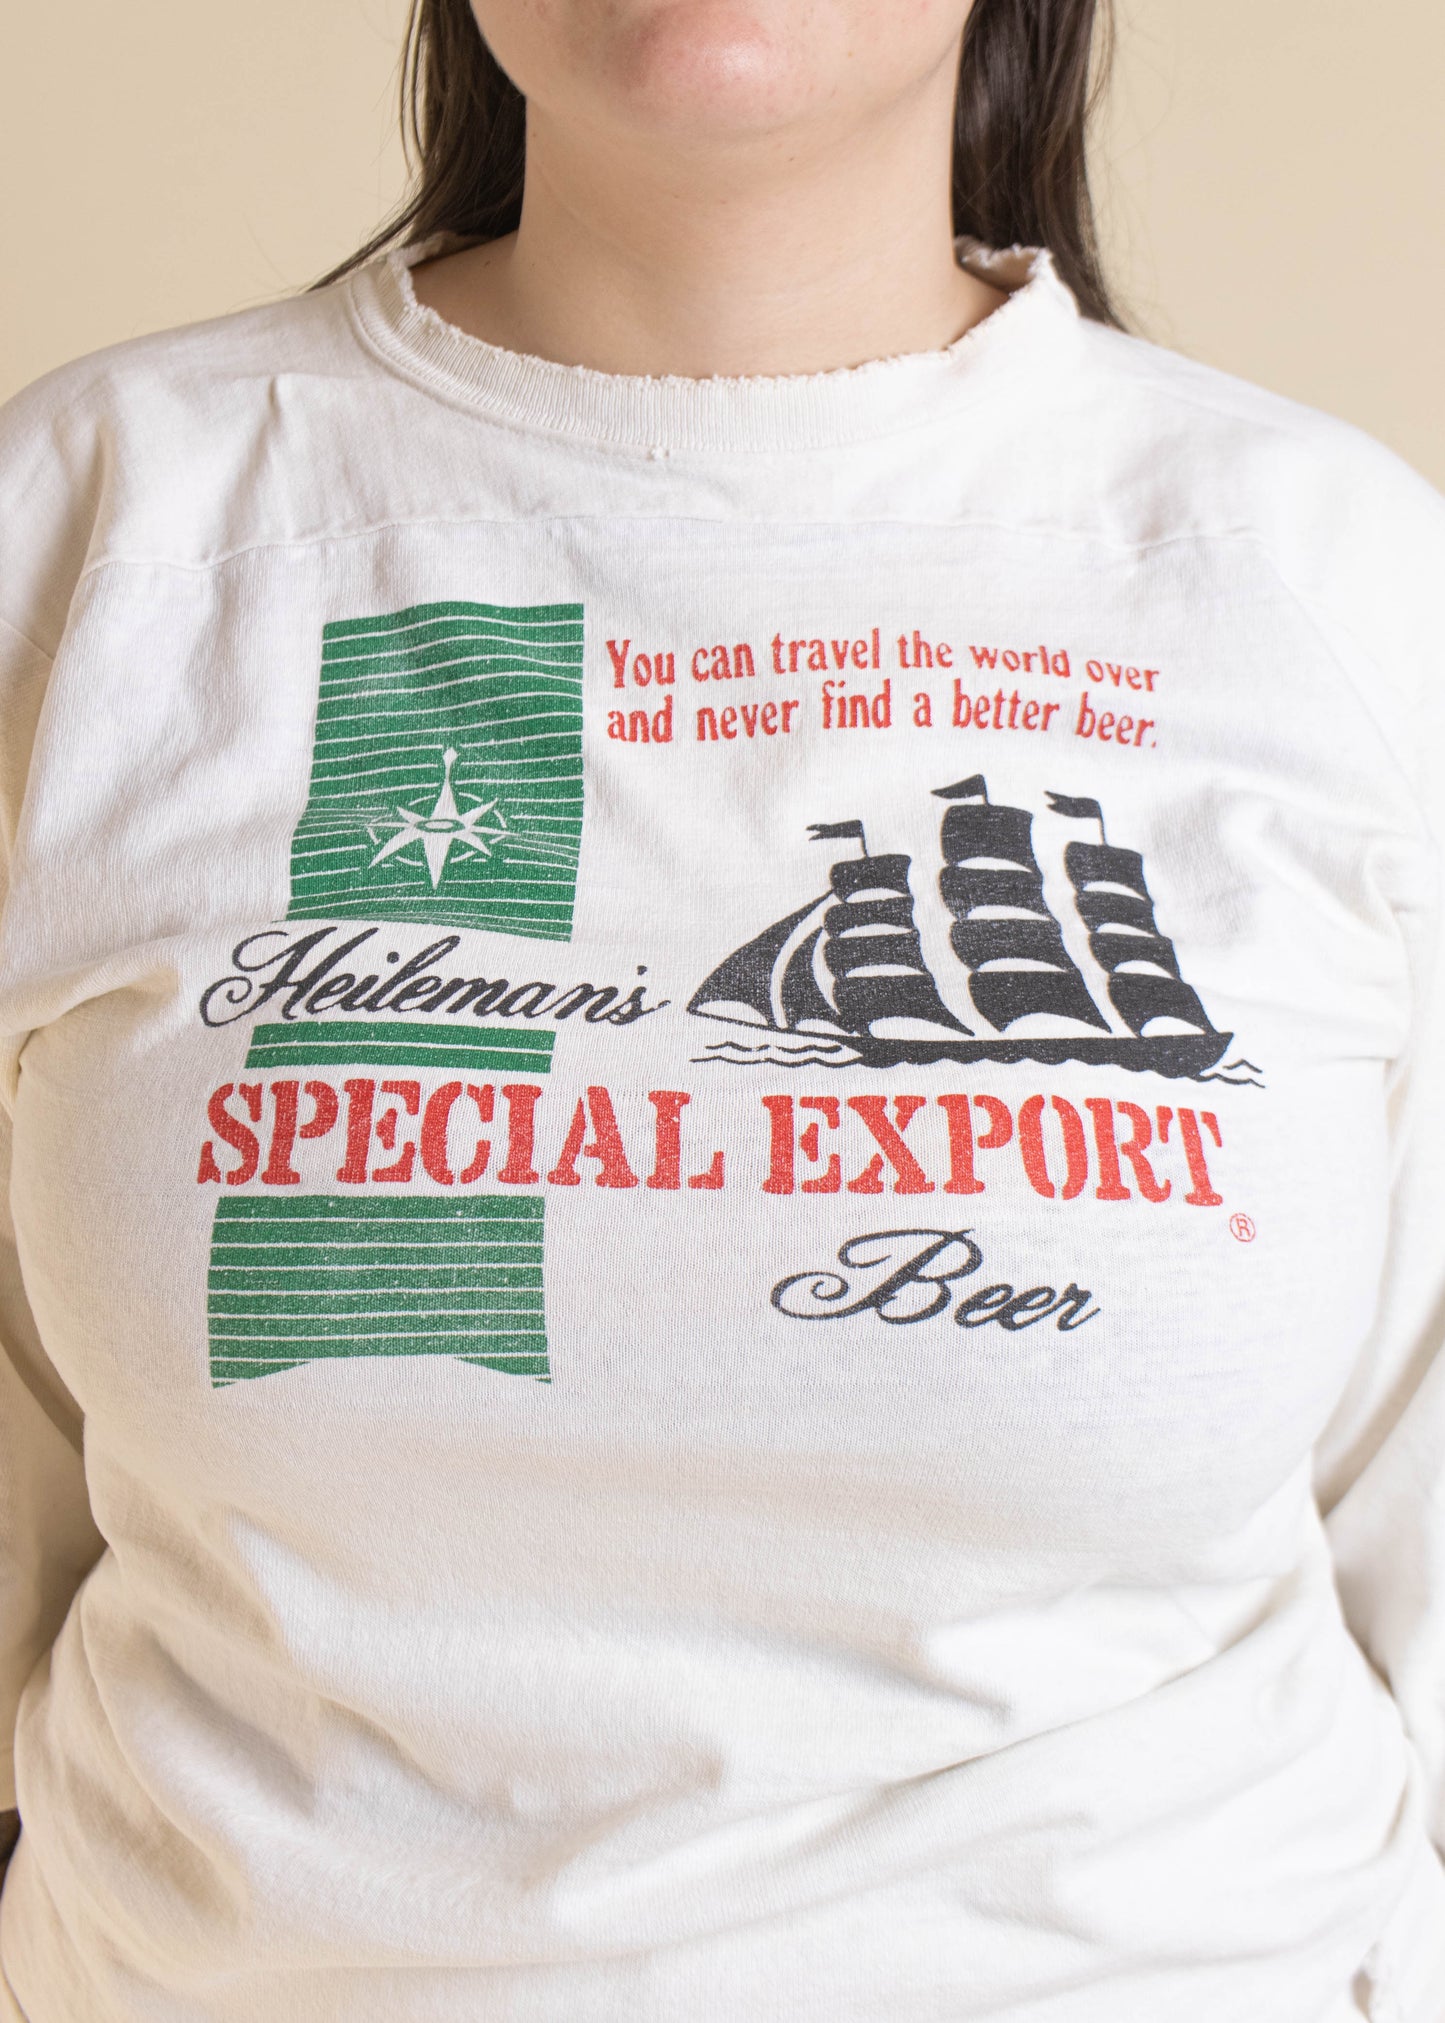 1980s Heileman's Special Export Beer 3/4 Sleeve T-Shirt Size M/L